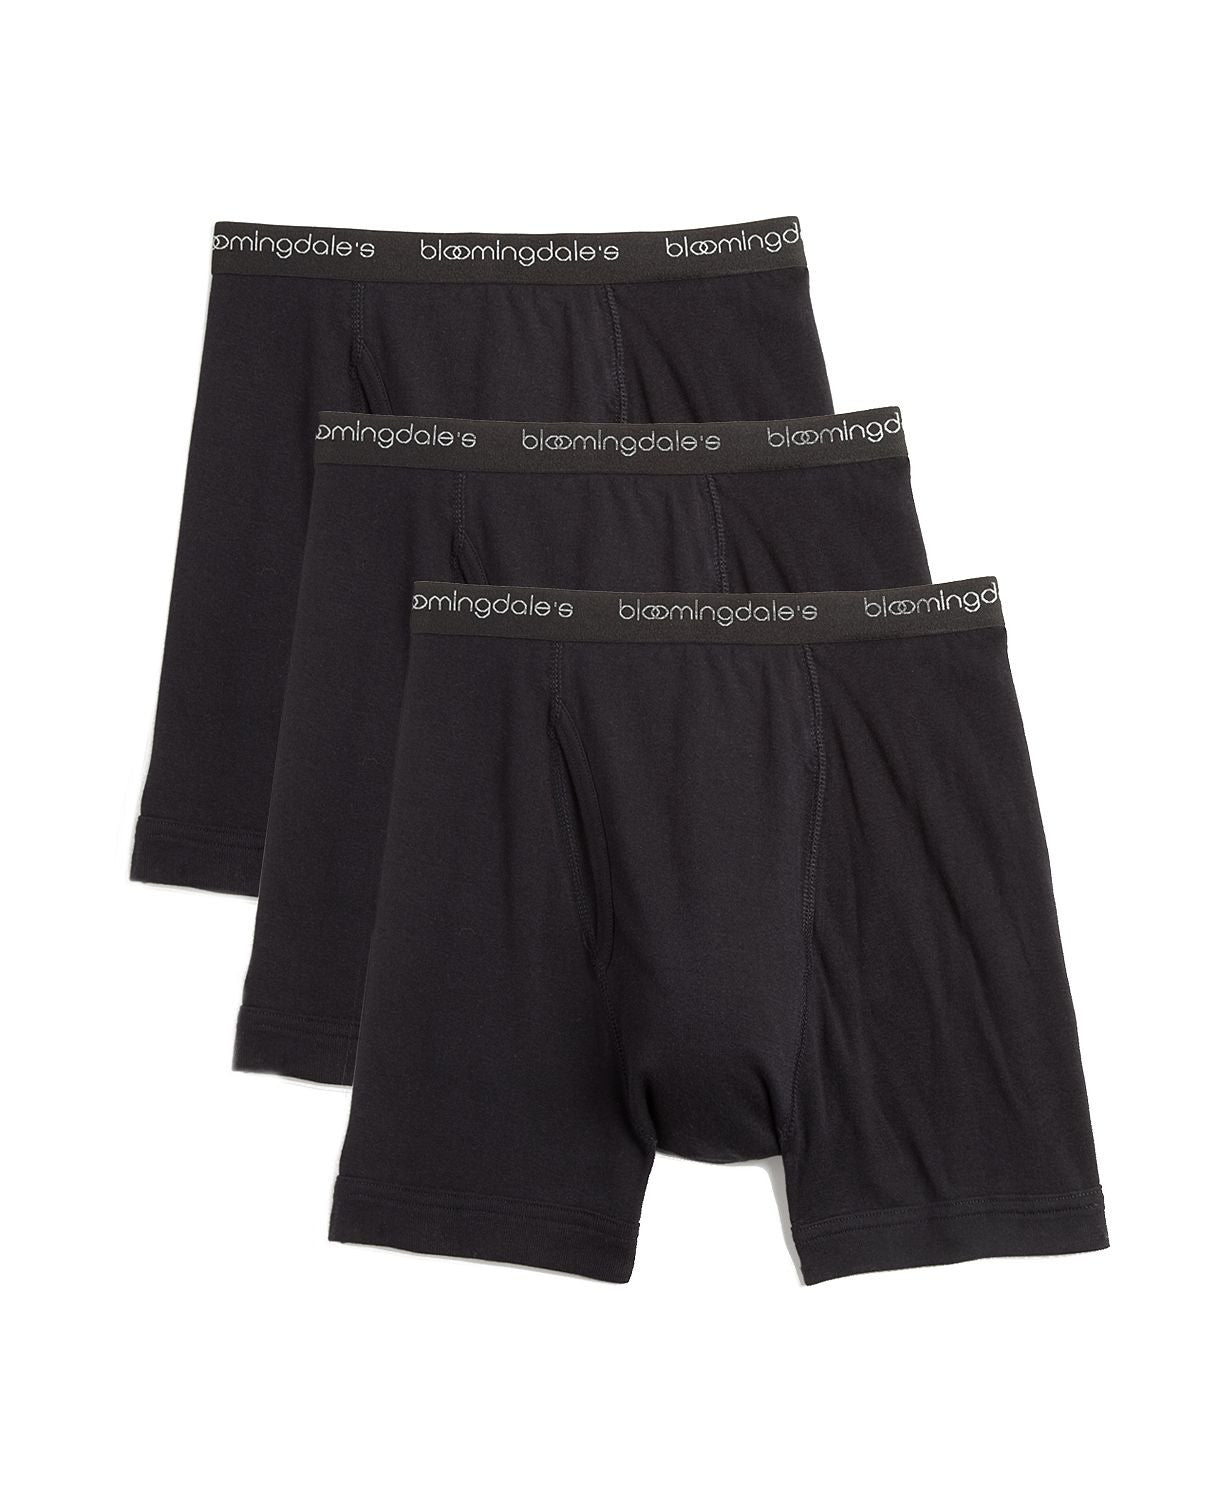 The Men's Store  Boxer Briefs Pack Of 3 Black